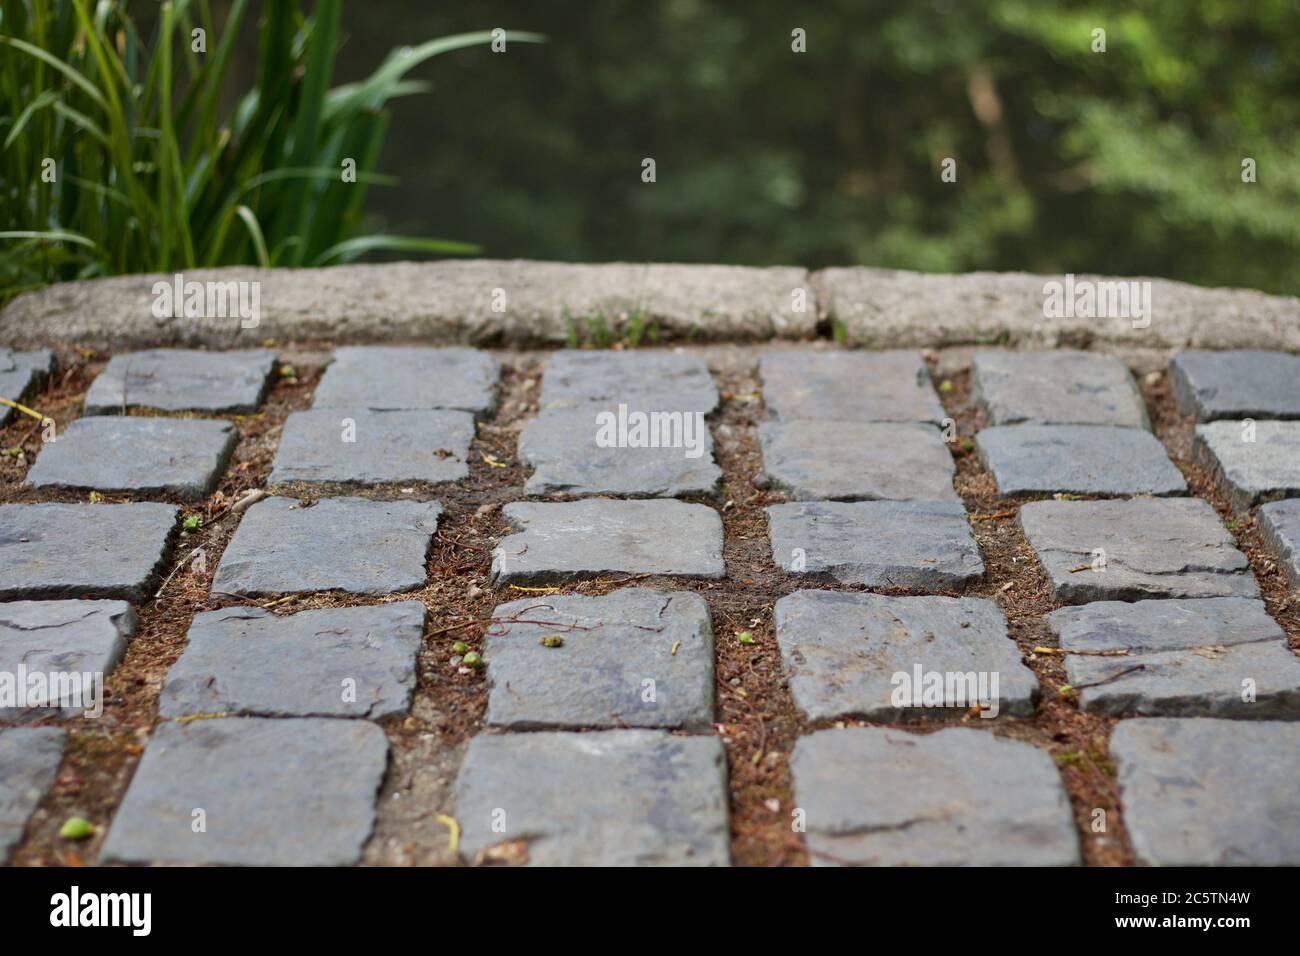 Background of close up of rows of cobblestones with greenery behind Stock Photo